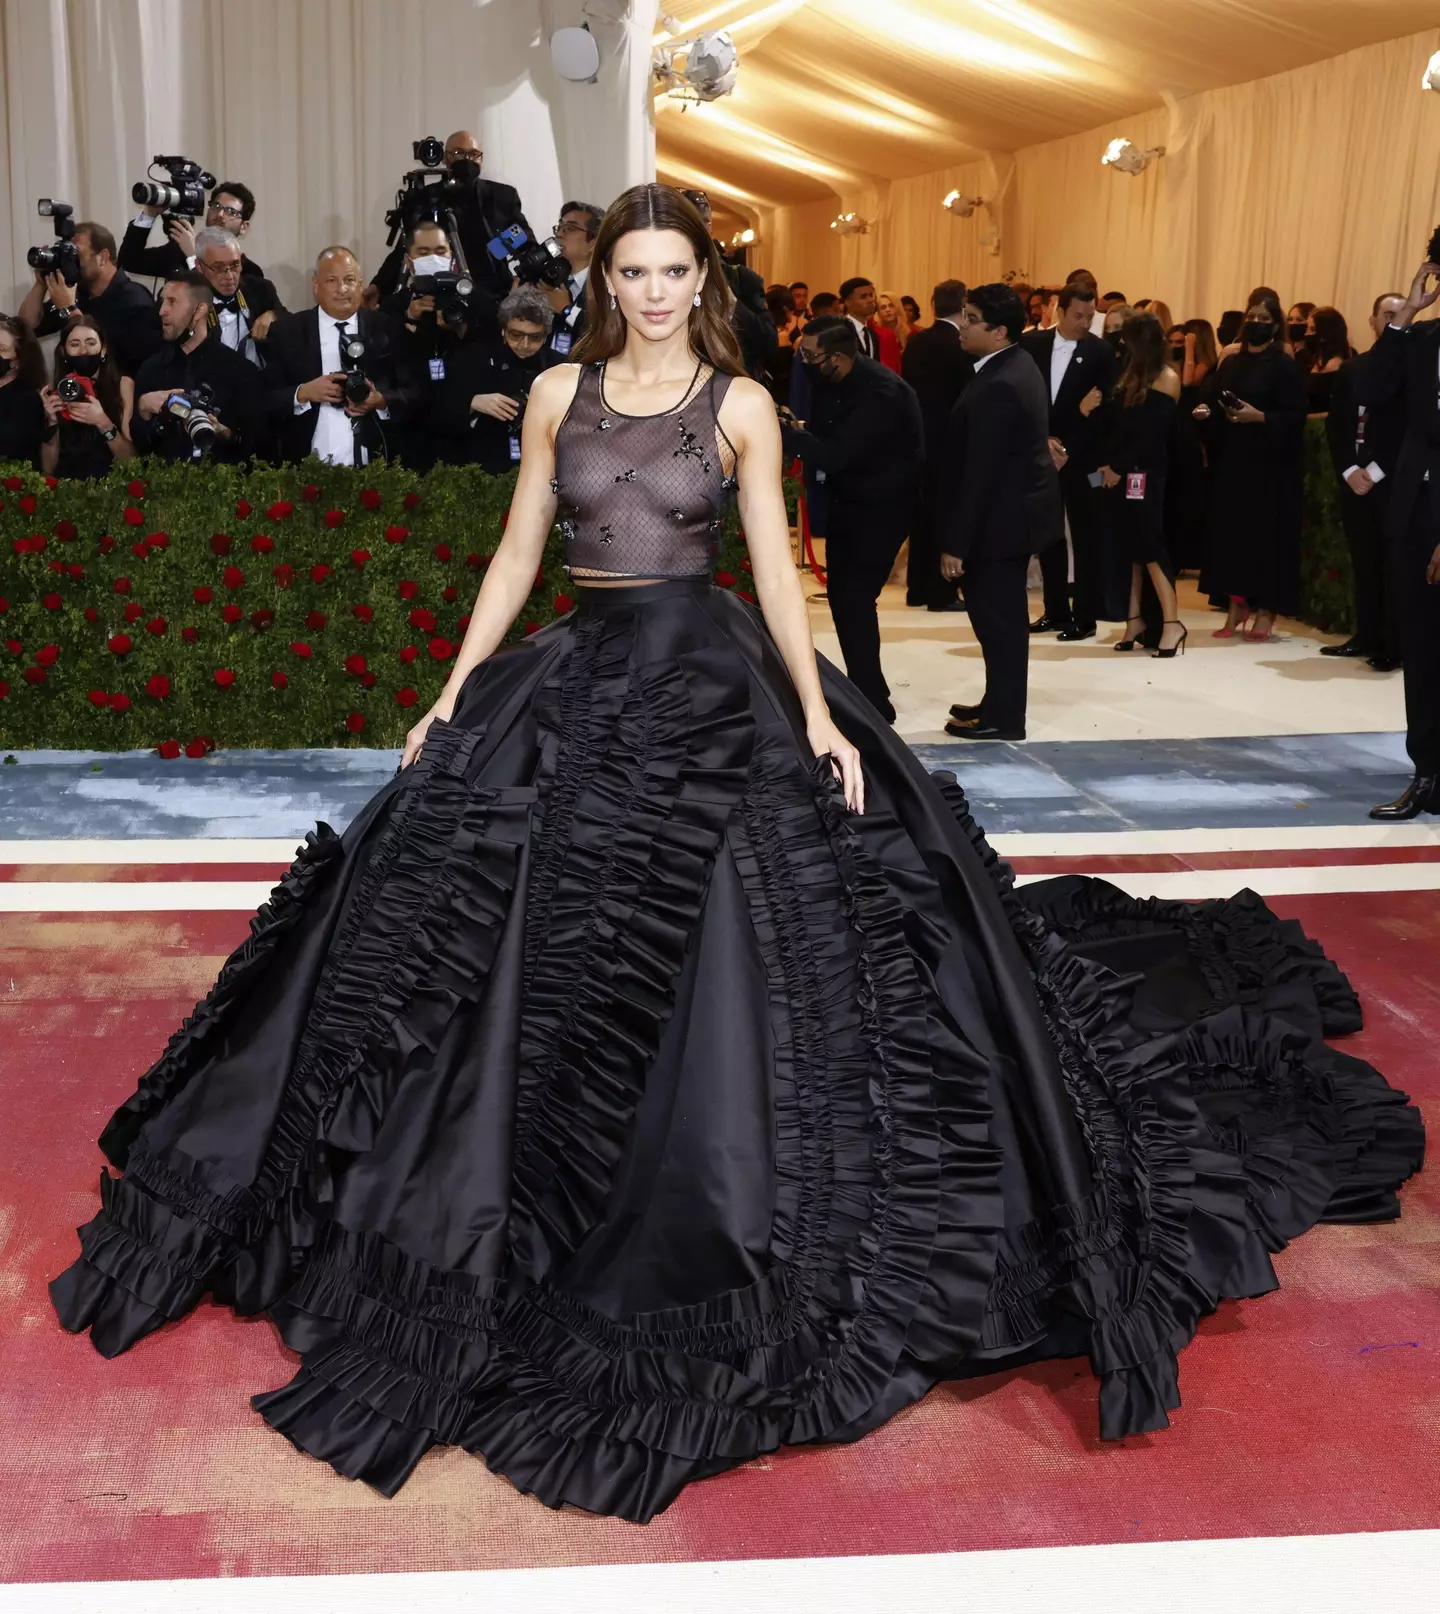 Kendall Jenner attended the Met Gala this year.